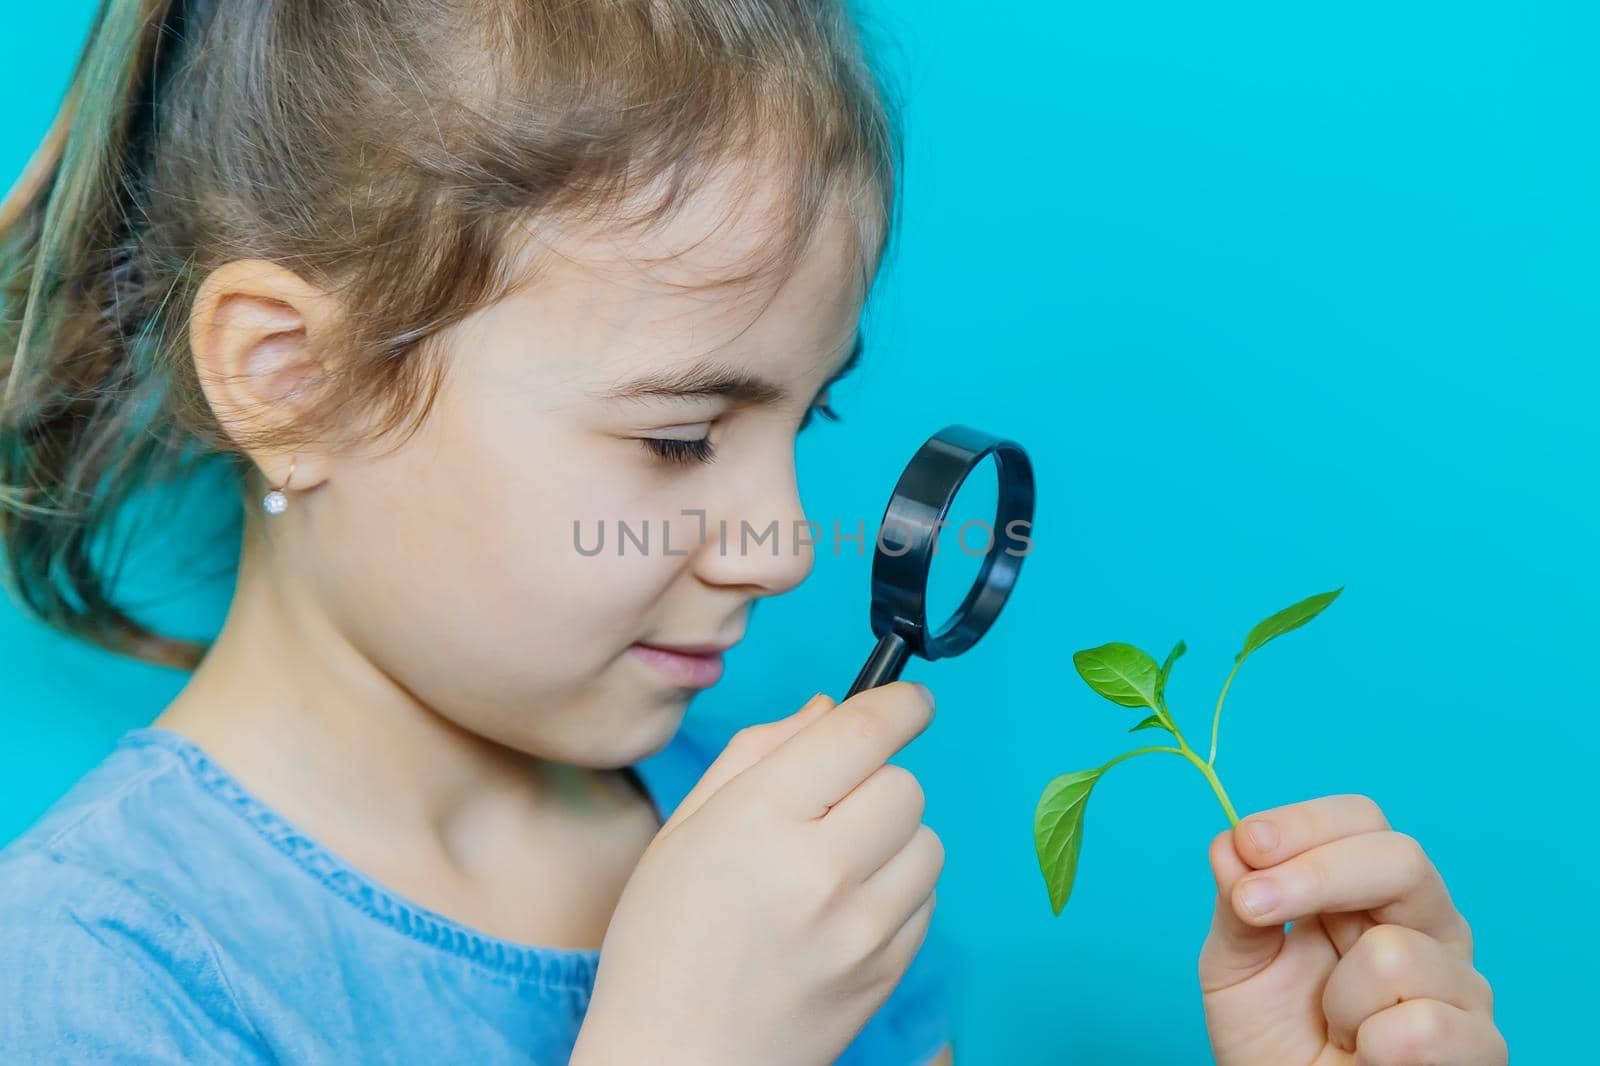 The child examines the plant with a magnifying glass. Selective focus. by yanadjana